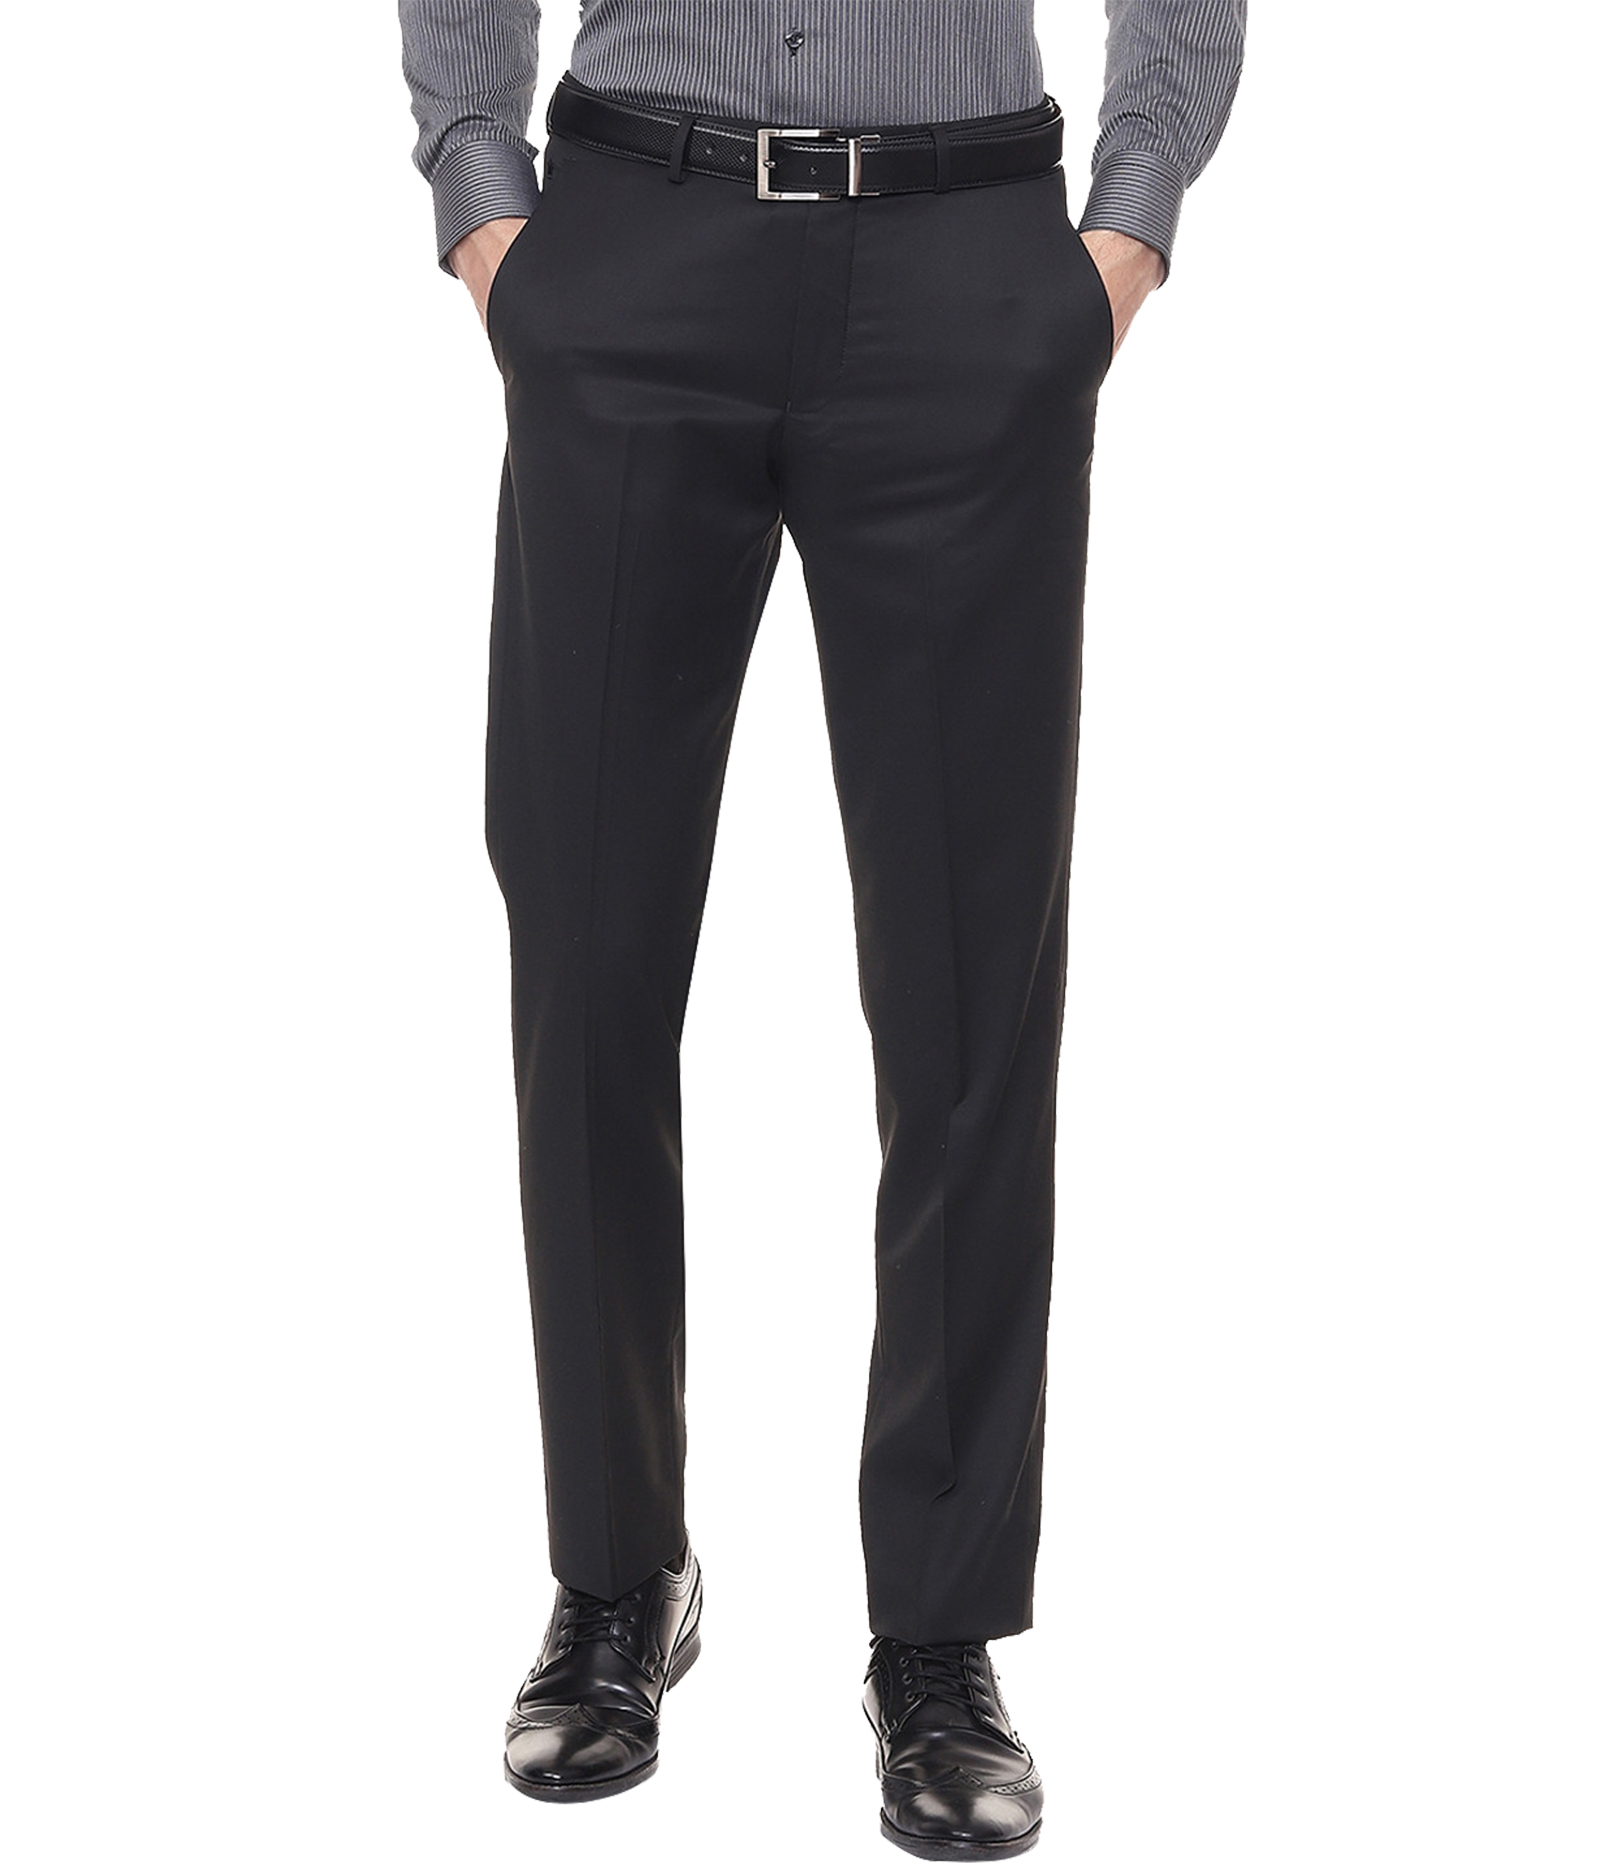 Buy Haoser black formal trousers for men Daily office wear formal pant for man Online - Get 48% Off